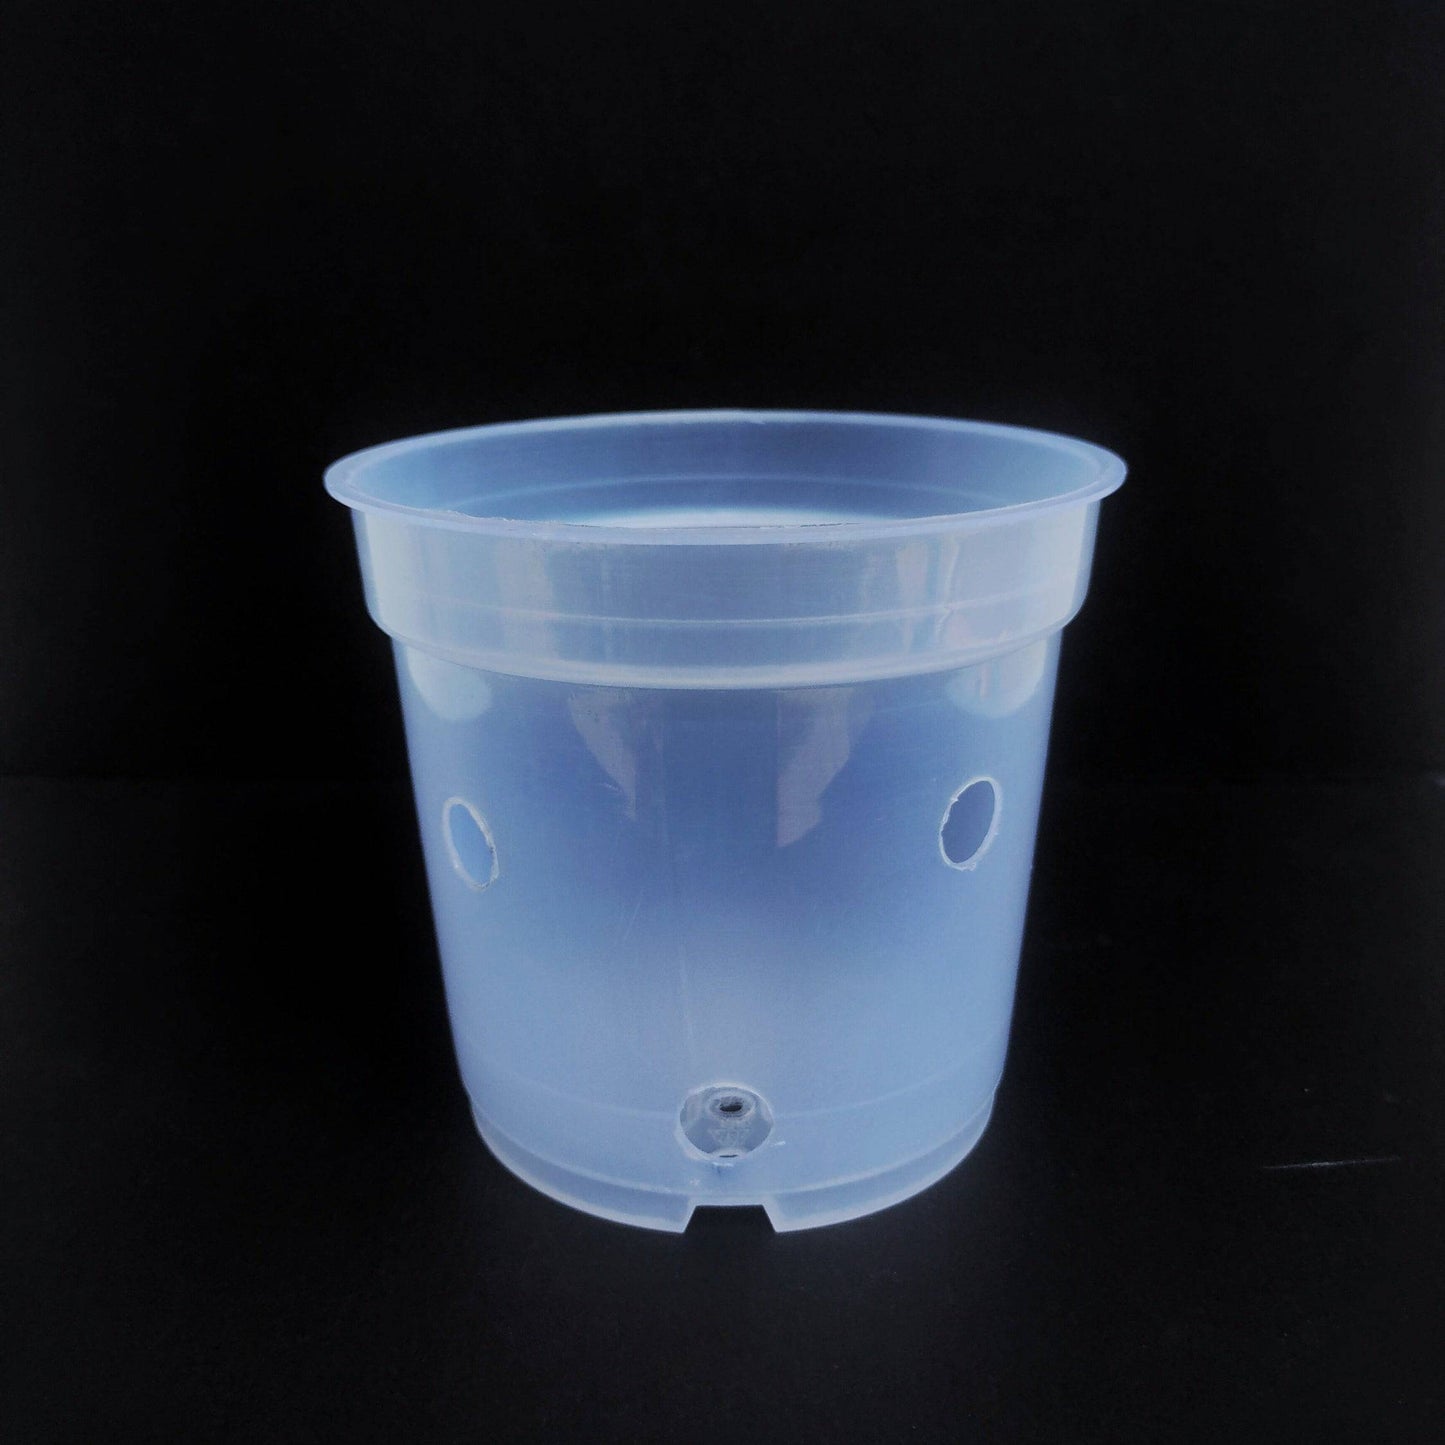 Plastic pot 4.7" clear - with side holes - Buy Orchids Plants Online by Orchid-Tree.com